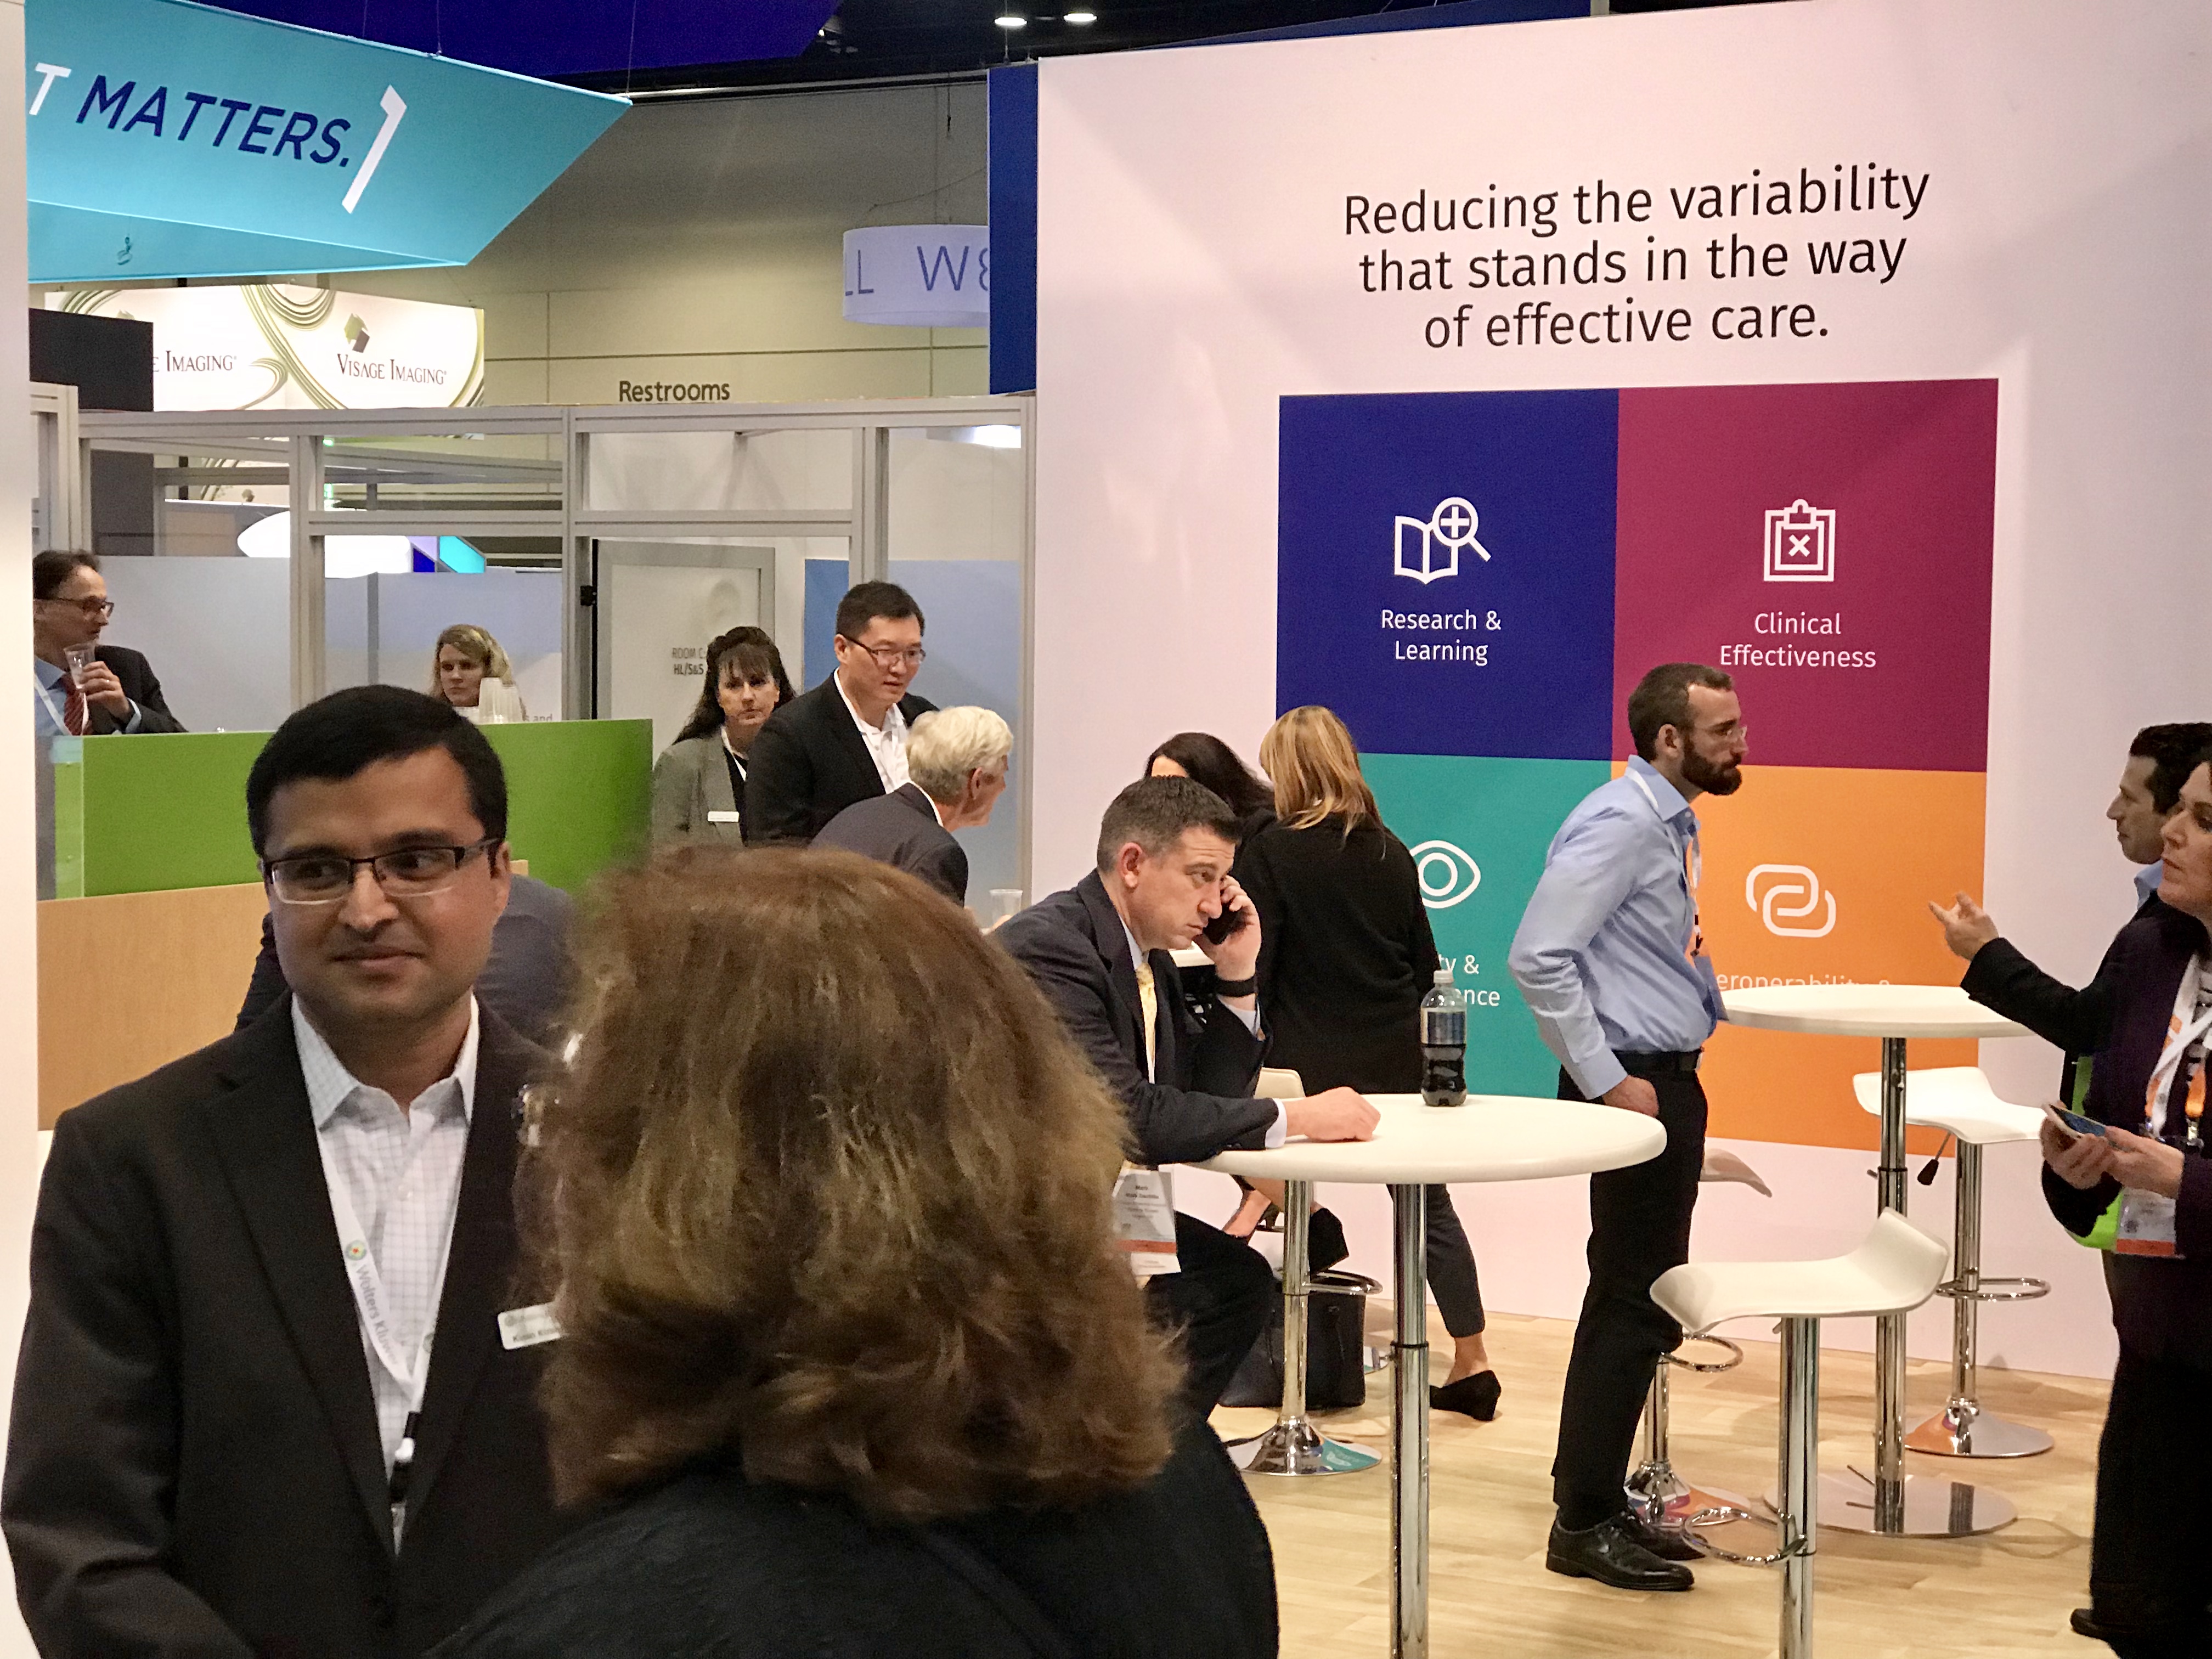 People gather and network at the Wolters Kluwer Health booth at HIMSS 2019 conference.